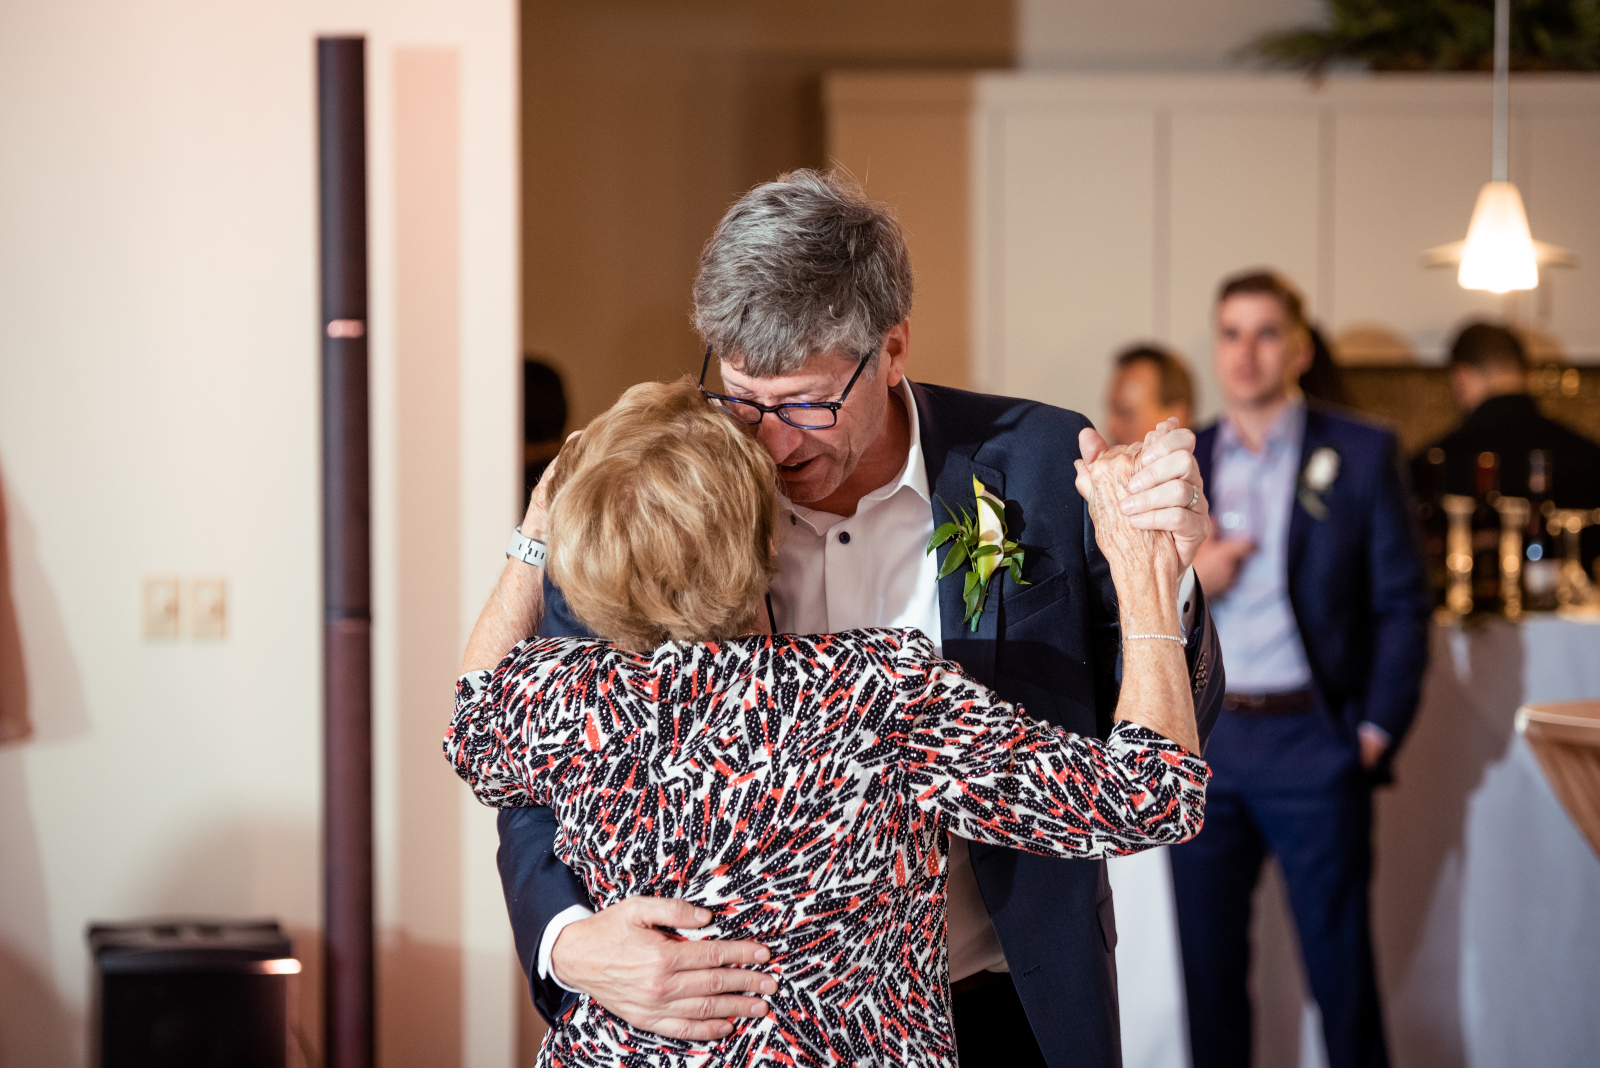 Groom with mom, mother groom dance, formal wedding dance, slow dance, smiling, laughing, classic wedding photo, older couple, cute, sweet, romantic urban wedding reception at Penthouse Events, Ohio City, Cleveland Flats